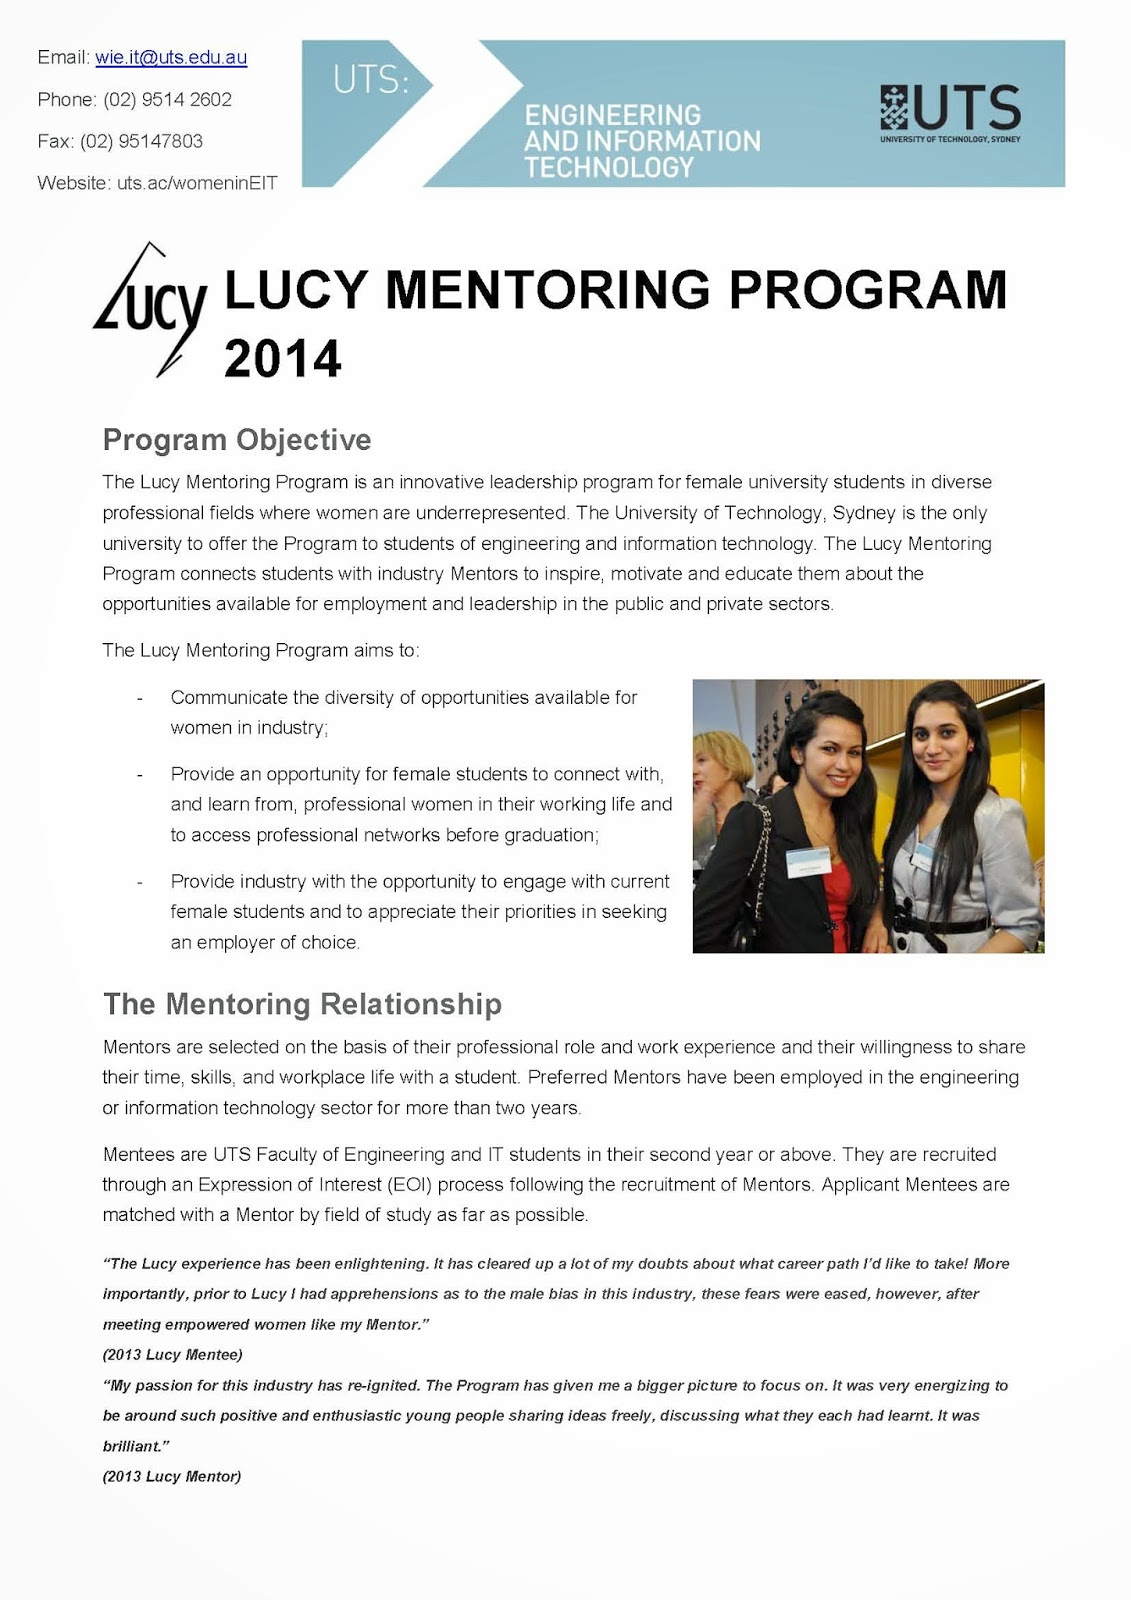 Lucy Mentoring Program - Students Information